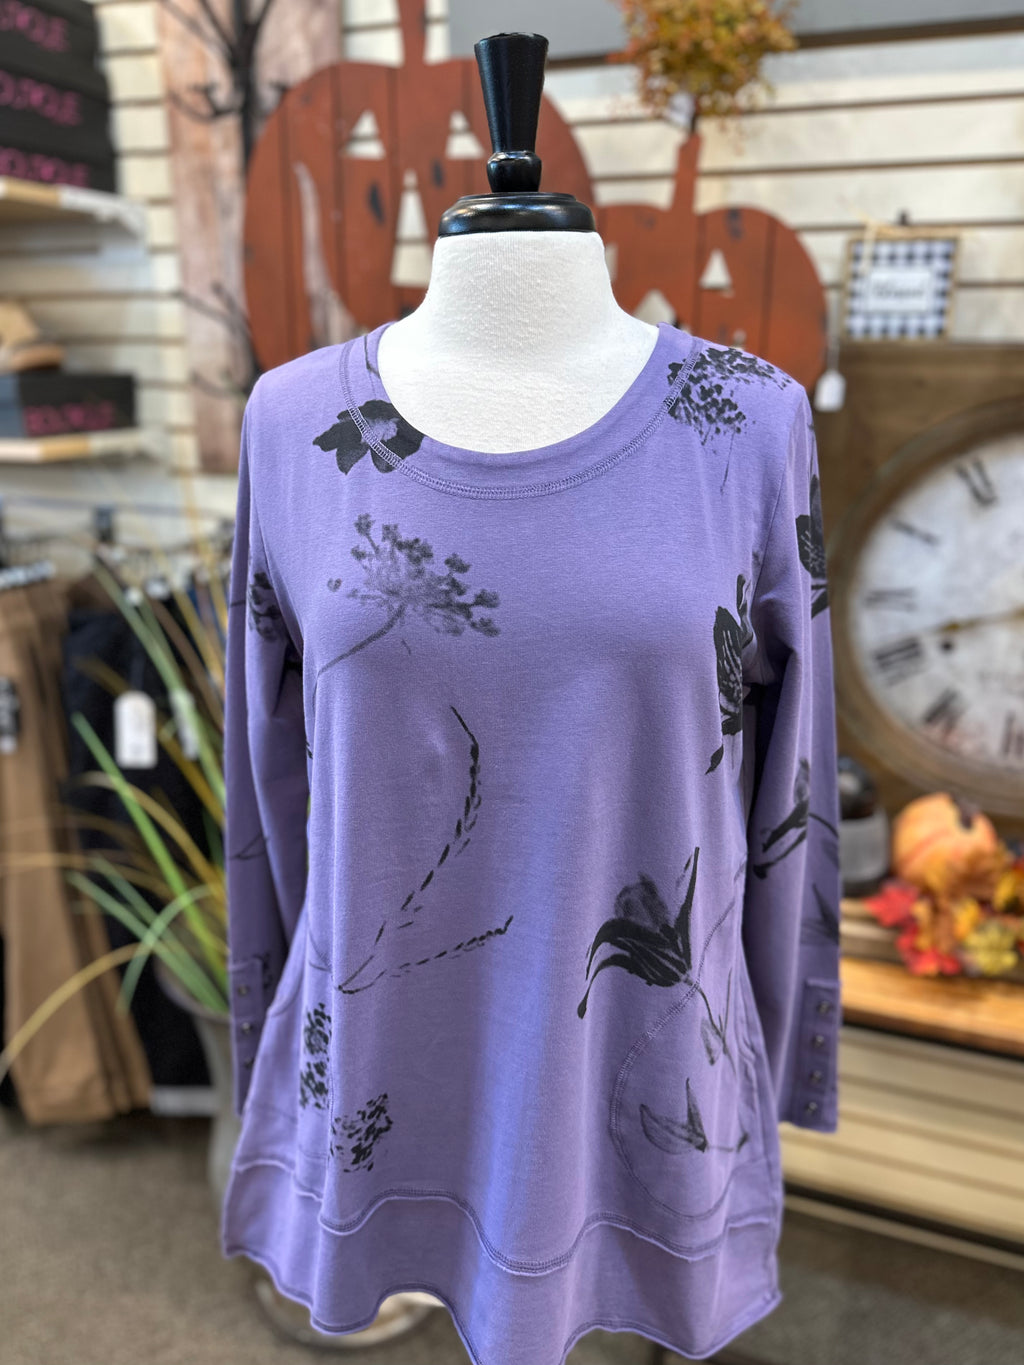 Wild Palms Round Neck with Floral Print Tunic